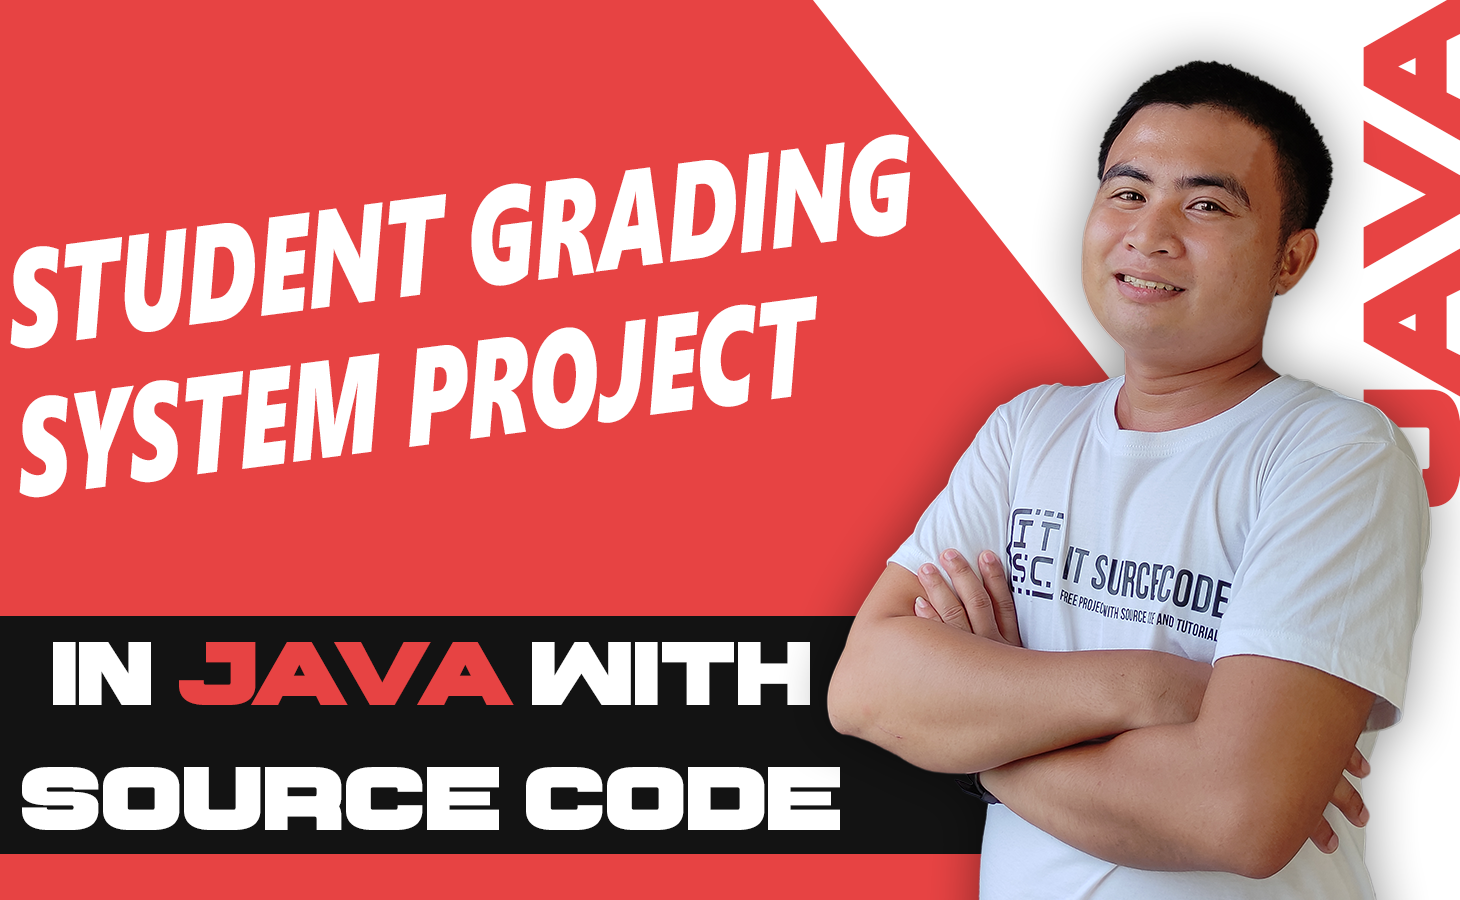 Student Grading System Project In Java With Source Code